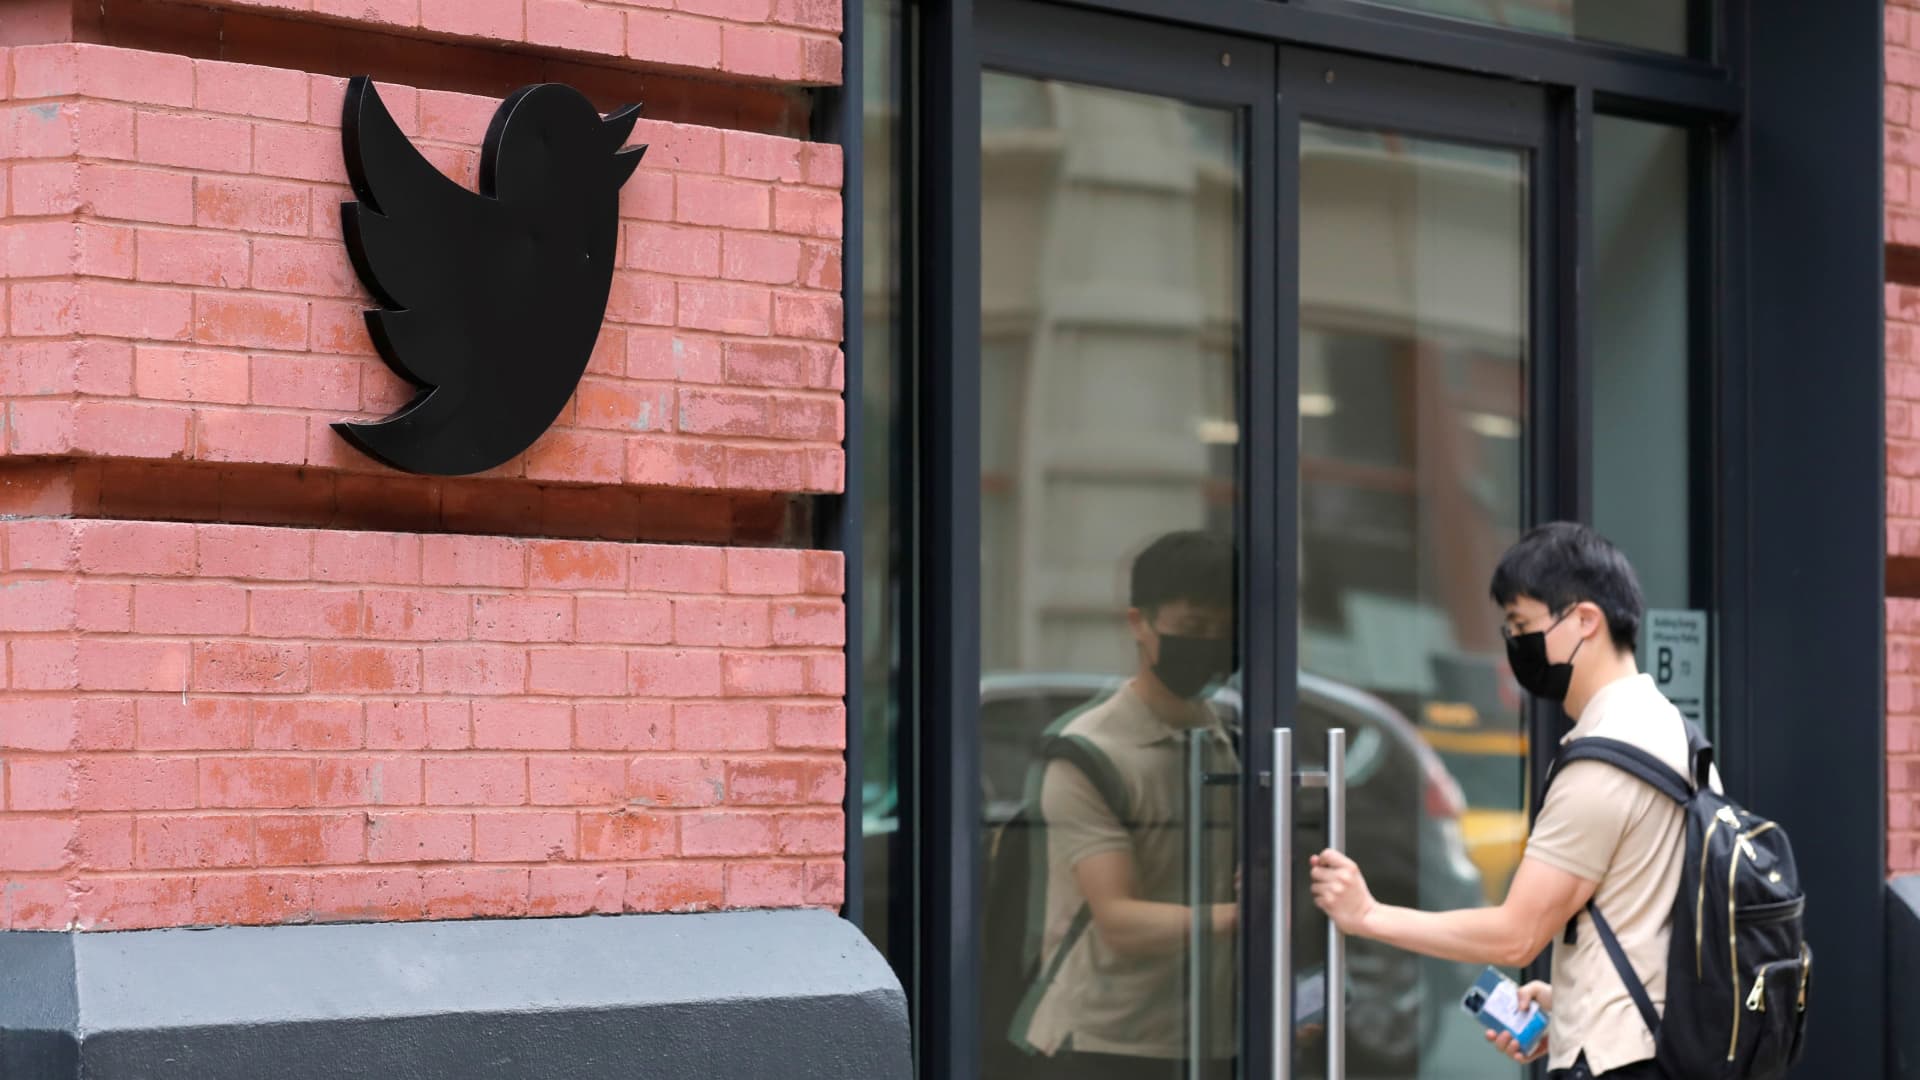 Twitter freezing and cutting costs as execs depart